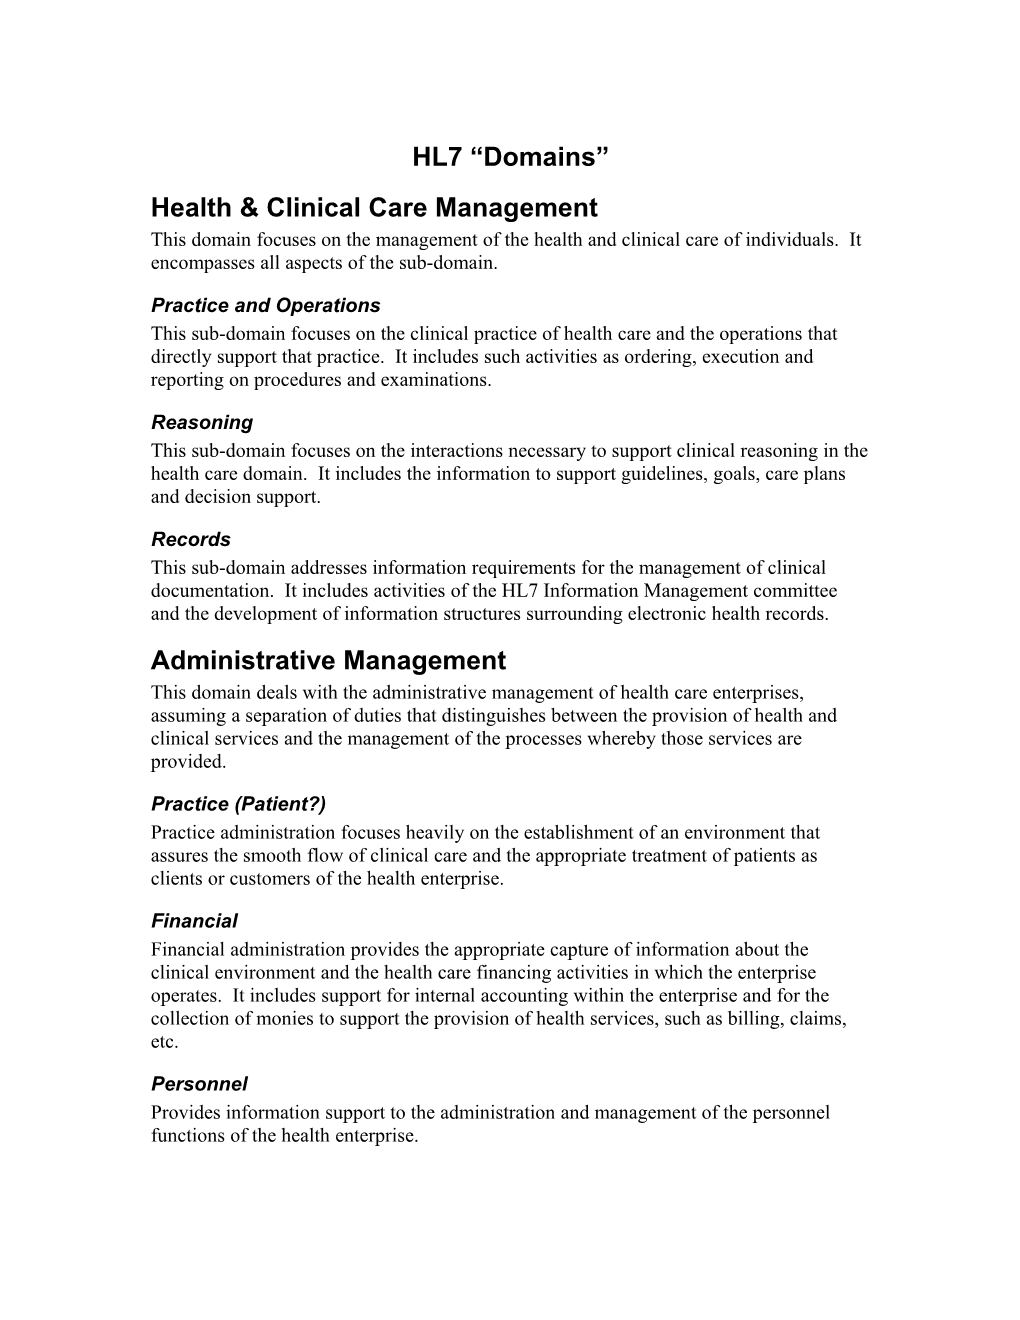 Health & Clinical Care Management